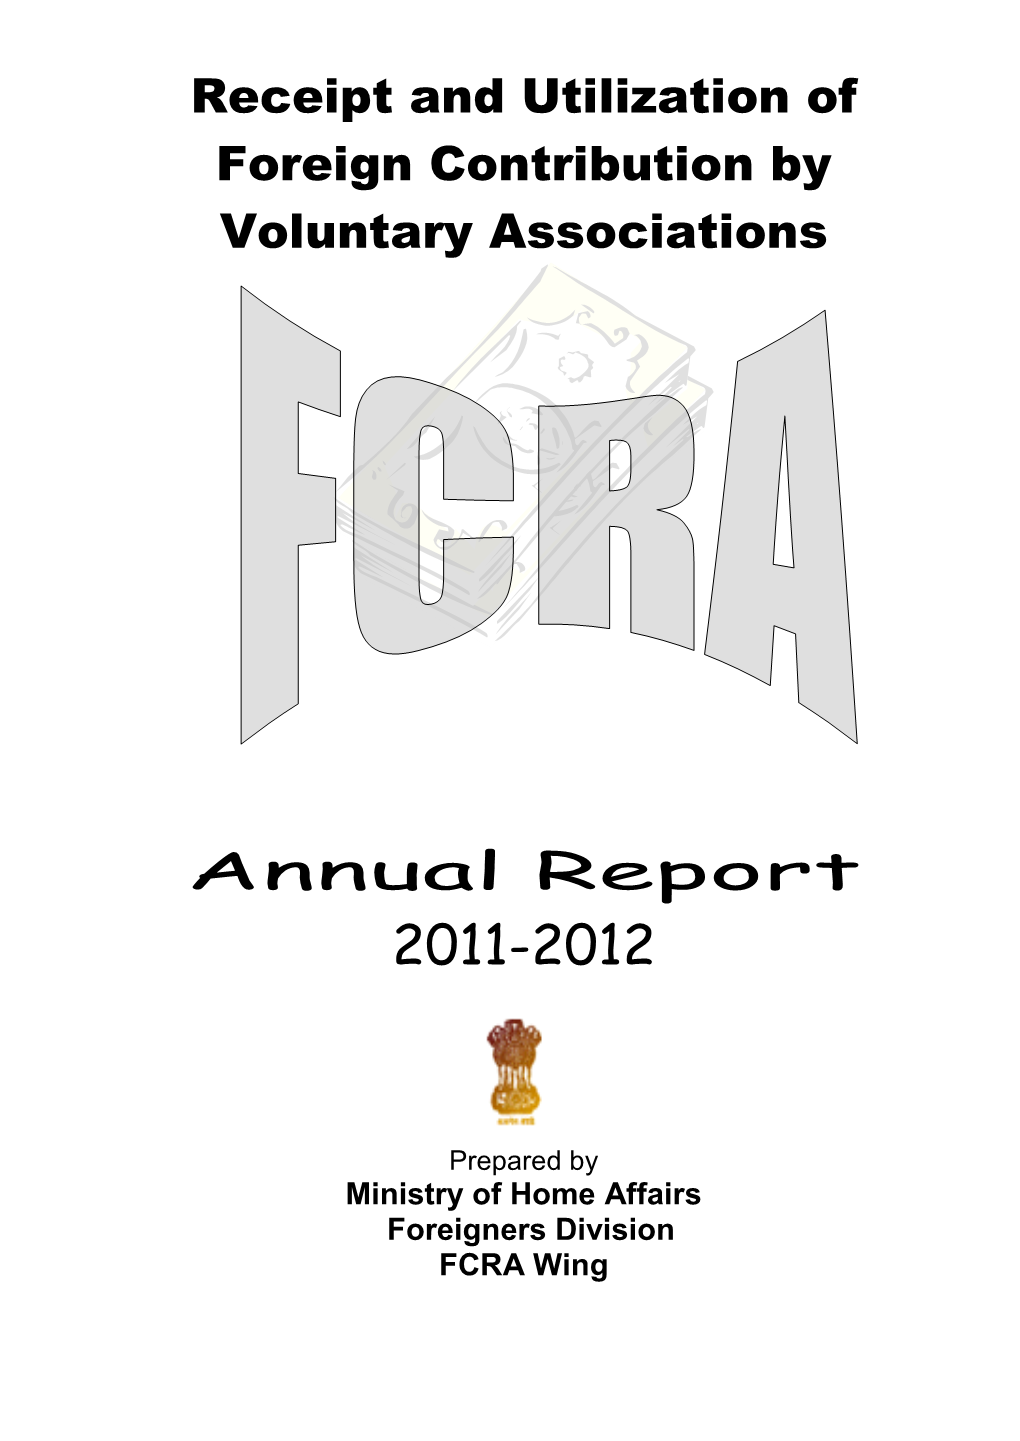 2011-12 Annual Report on Receipt and Utilization of Foreign